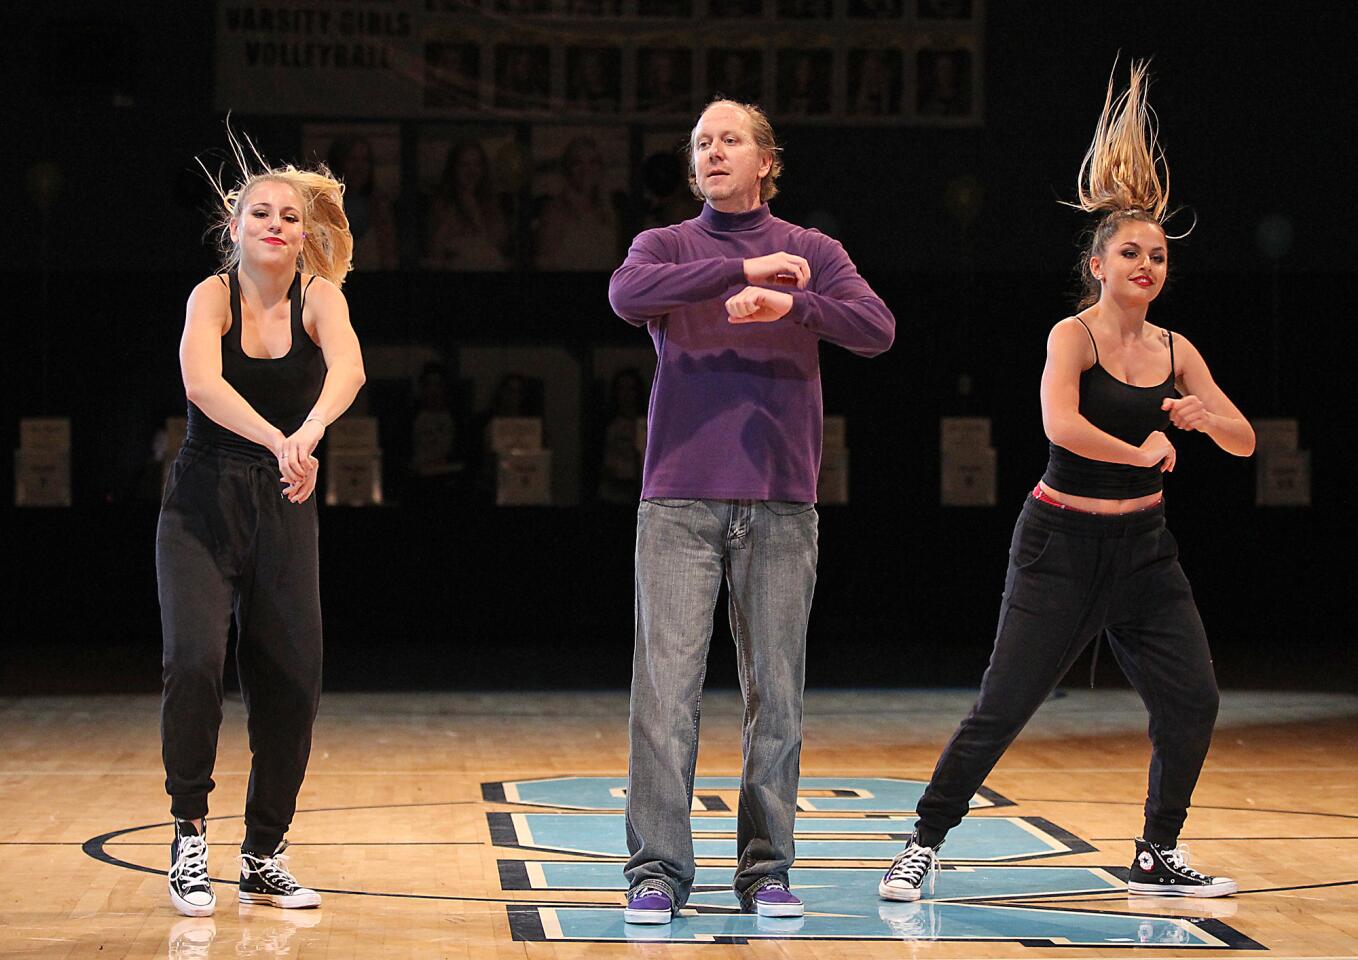 Teacher Daniel Leedy gets into the act to a hip-hop routine with students Sophie Axelson and Ava Antoyan during the Corona del Mar High fourth annual Dancing with the Teachers performance on Thursday in the school gym.